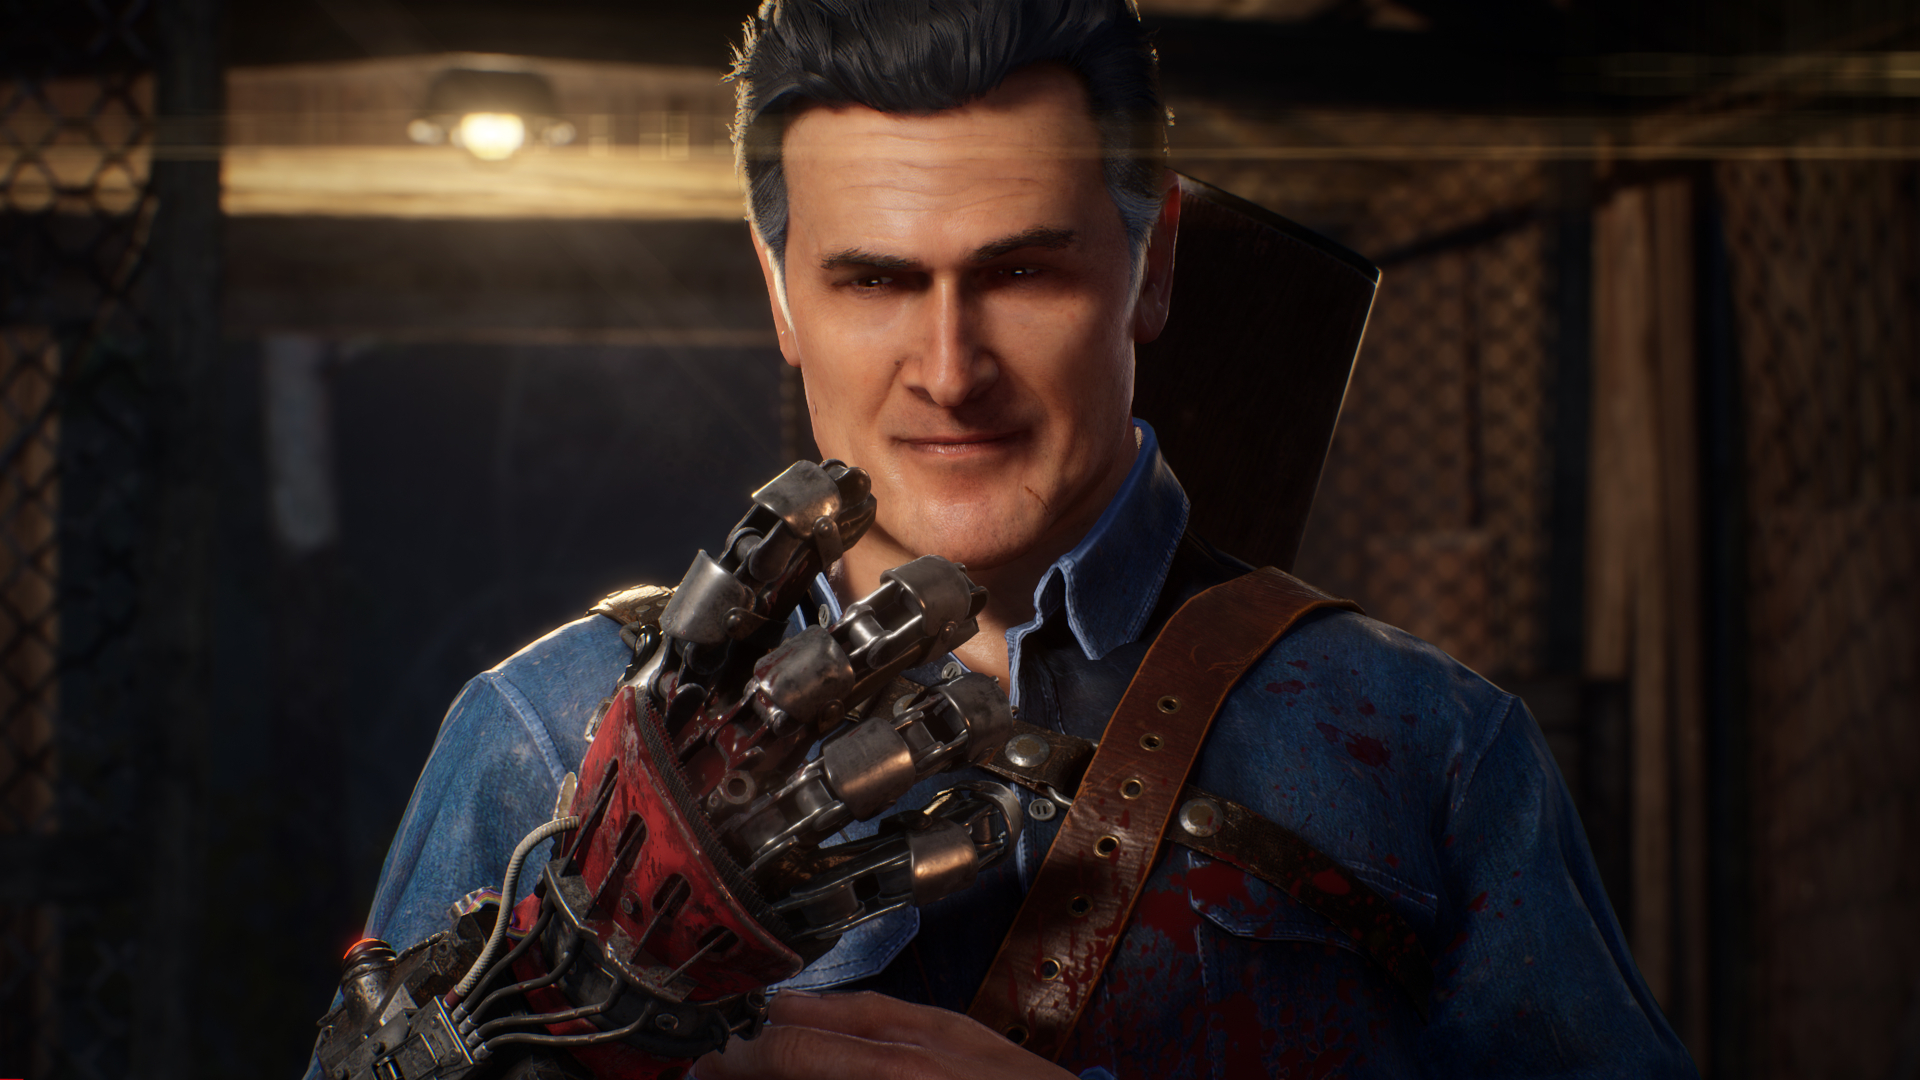 Evil Dead: The Game, an asymmetrical horror action game with Bruce Campbell on voice-over